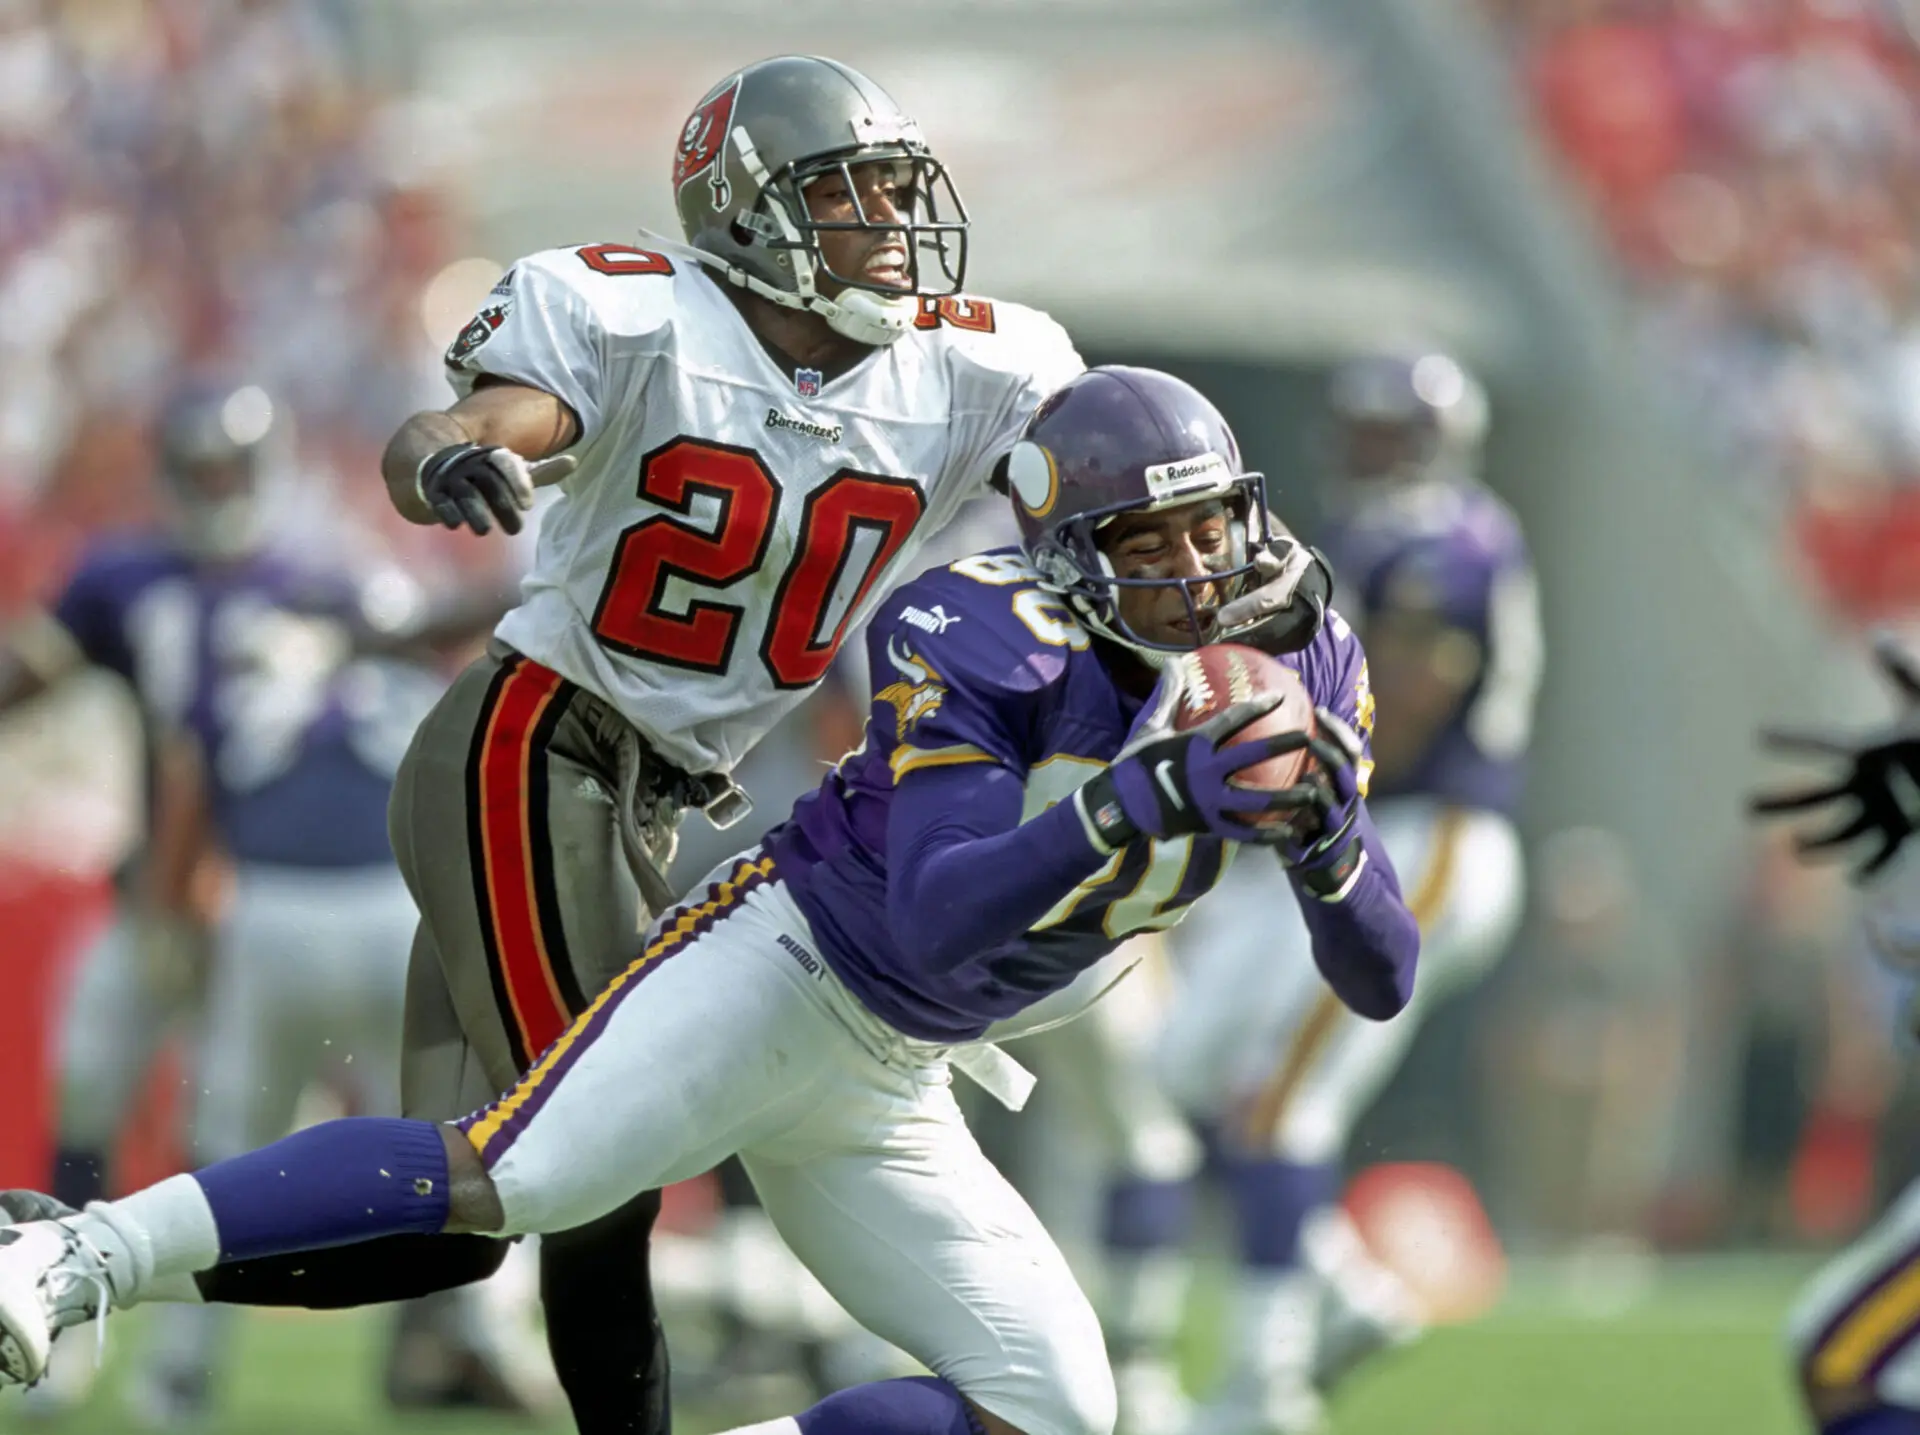 Minnesota Vikings - Cris Carter with a one-handed catch against